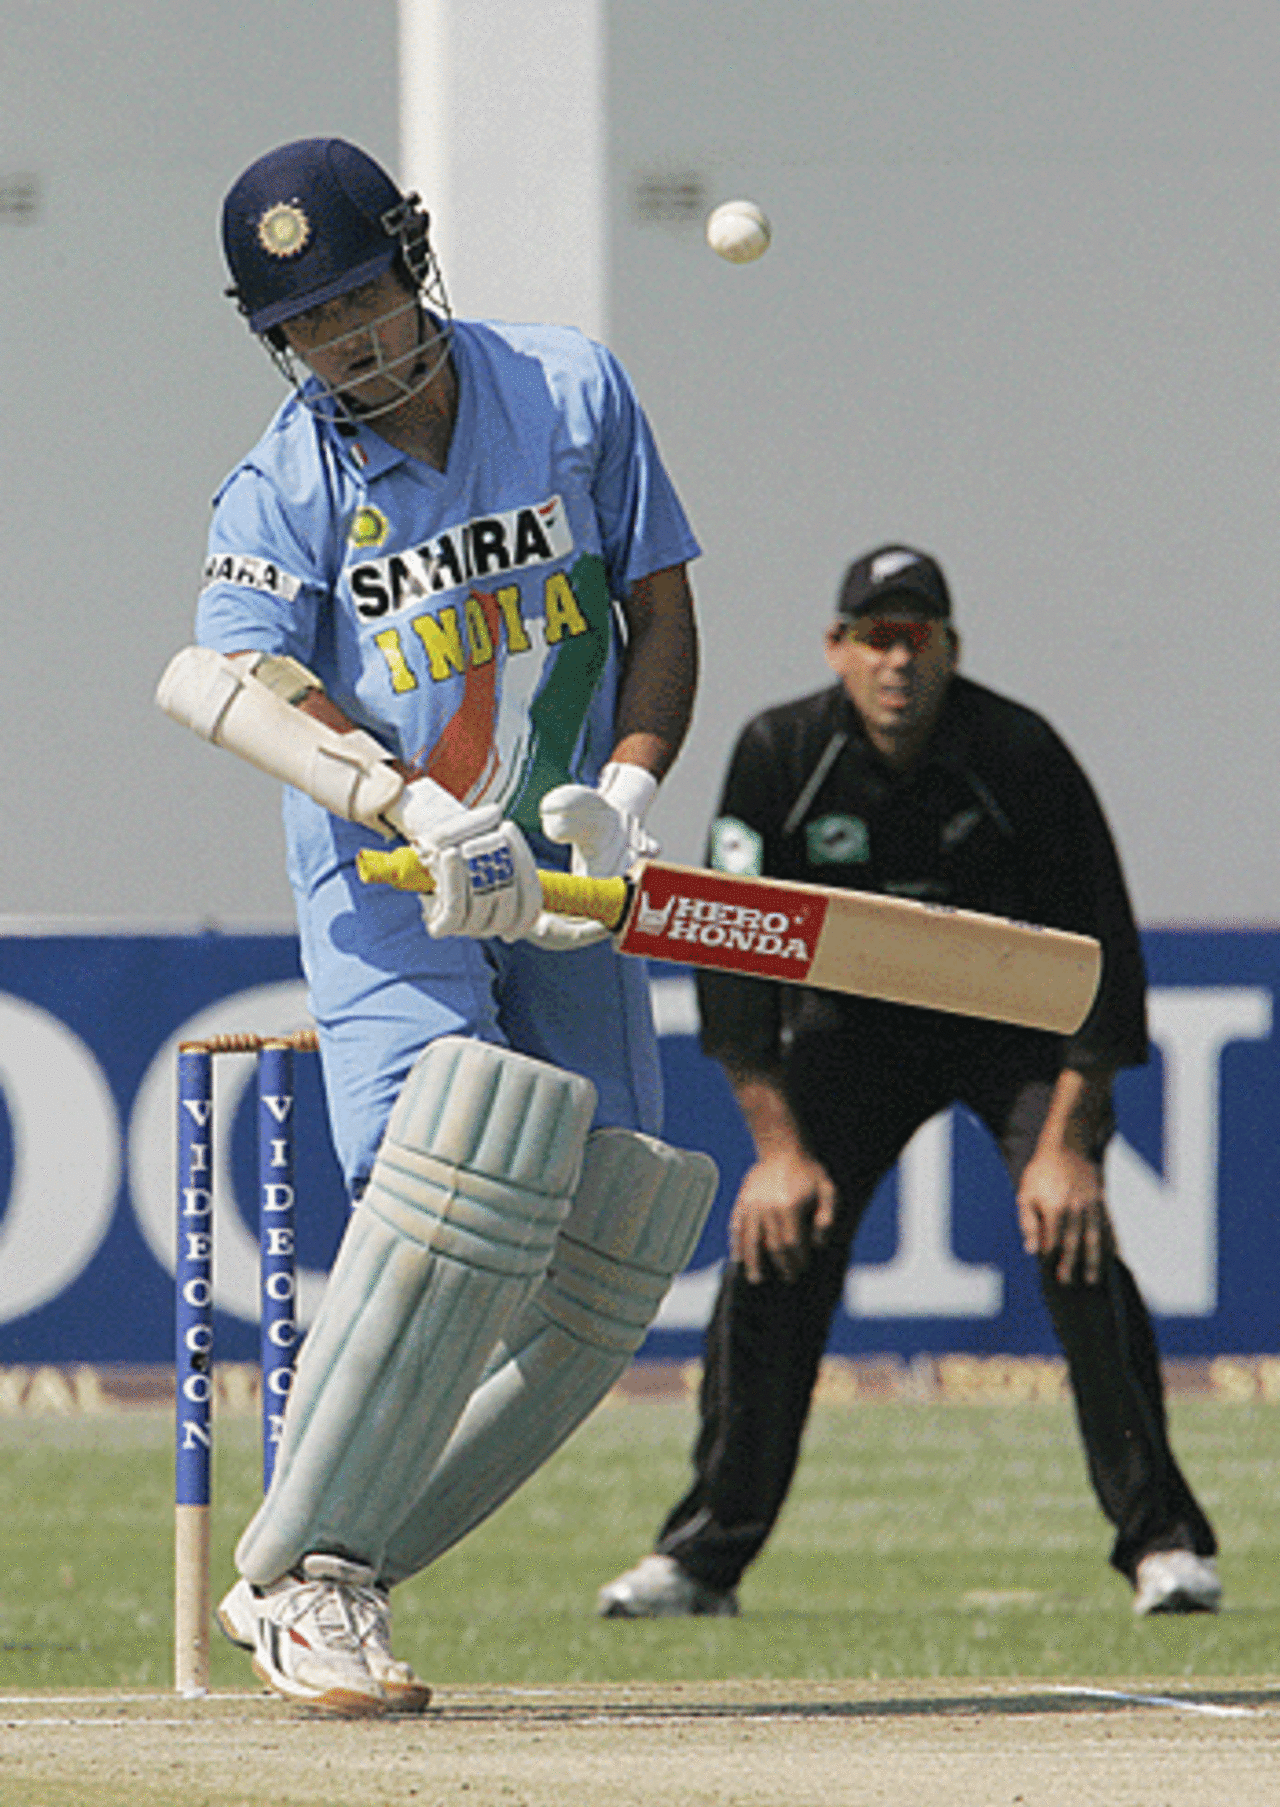 Sourav Ganguly gets out of the way of a Shane Bond bouncer during his innings of 31, India v New Zealand, Harare, September 6, 2005